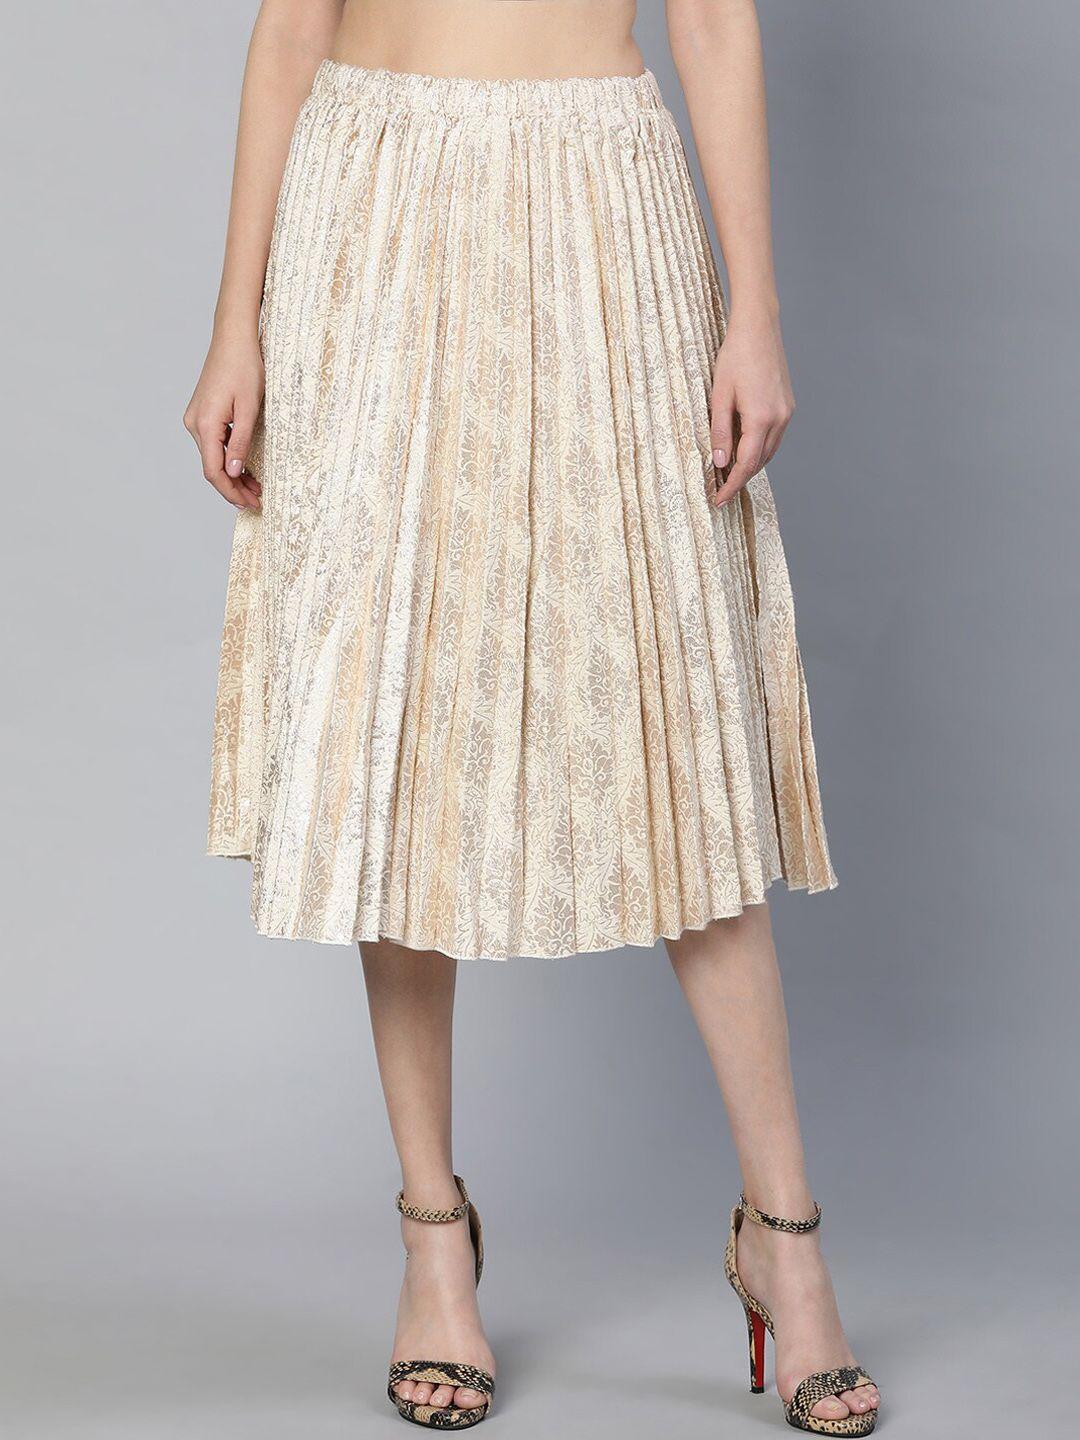 Oxolloxo Printed Pleated Above Knee Length Flared Skirt